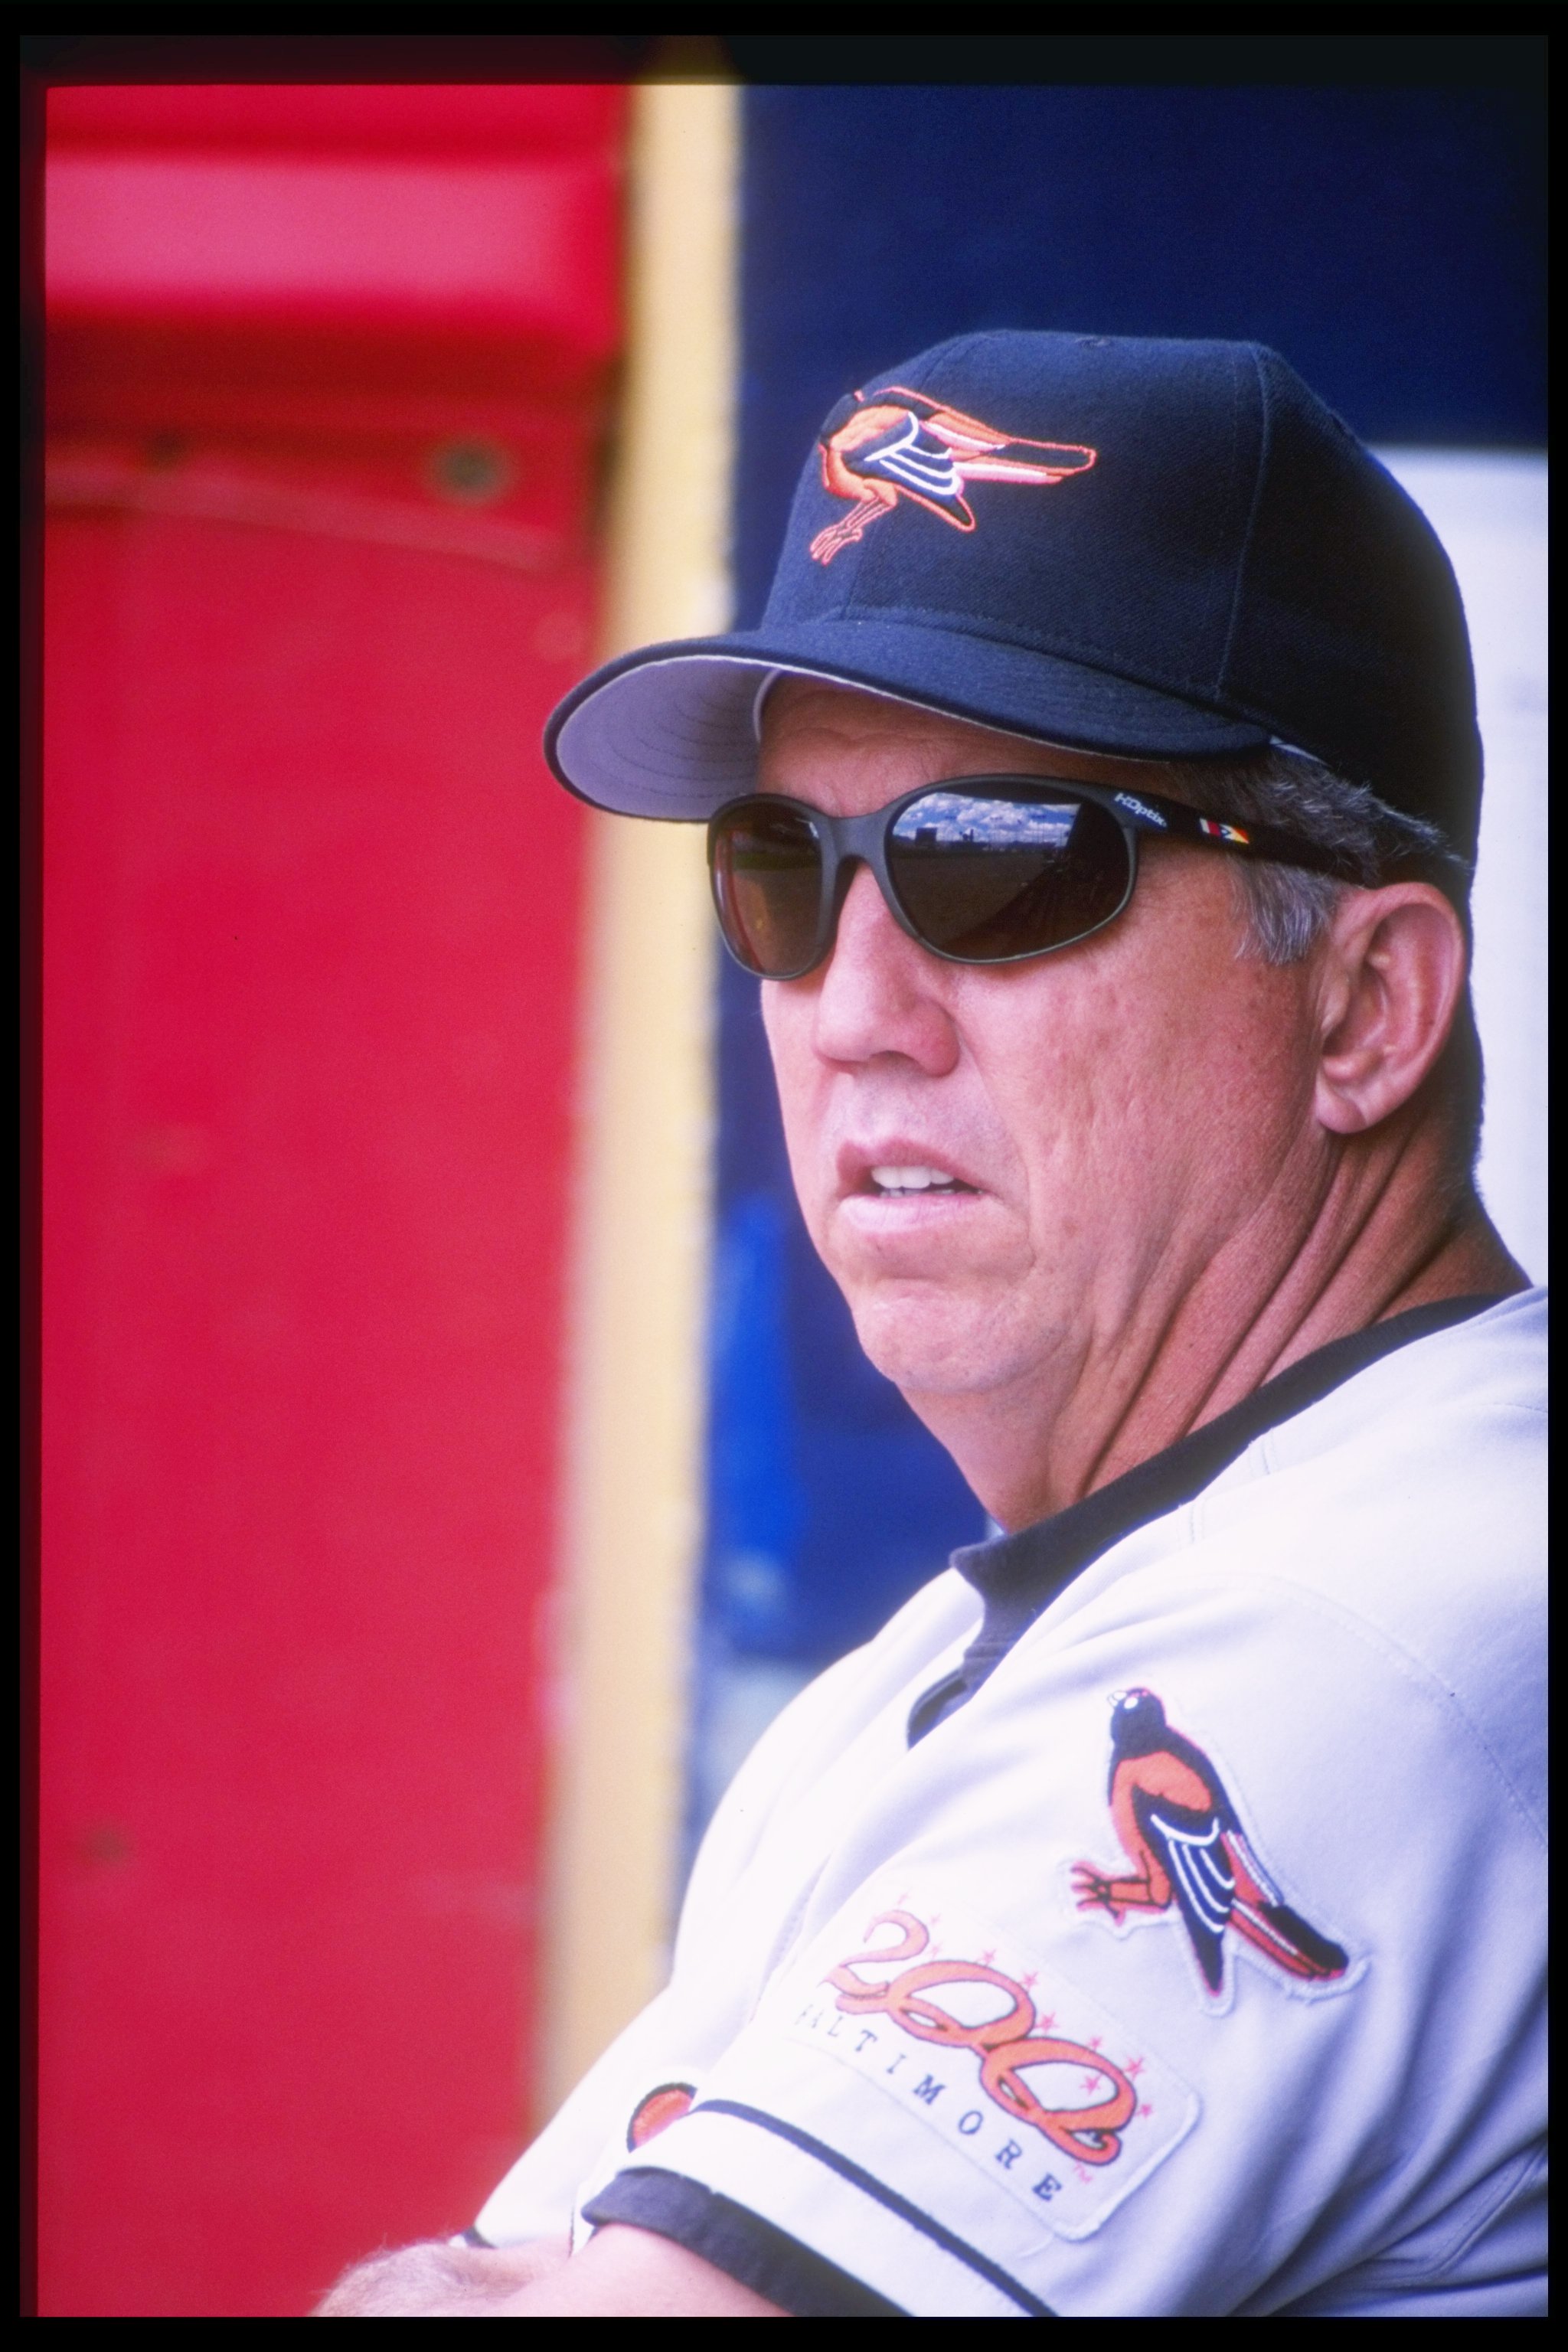 baltimore orioles manager